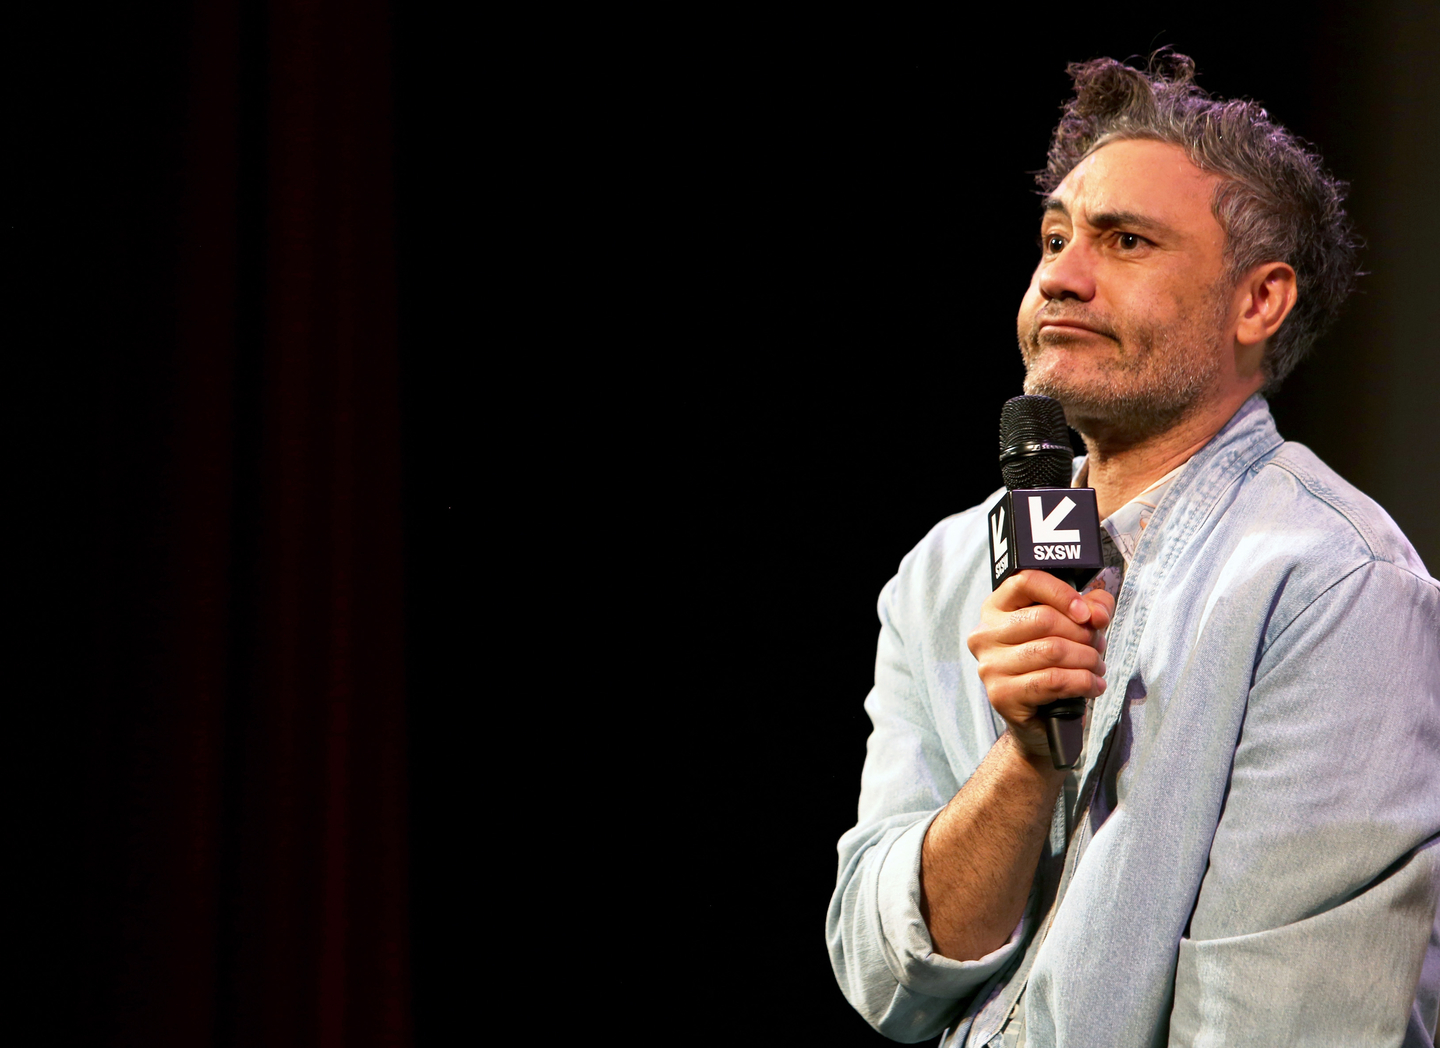 Taika Waititi at the What We Do in the Shadows World Premiere – Photo by Travis P Ball/Getty Images for SXSW